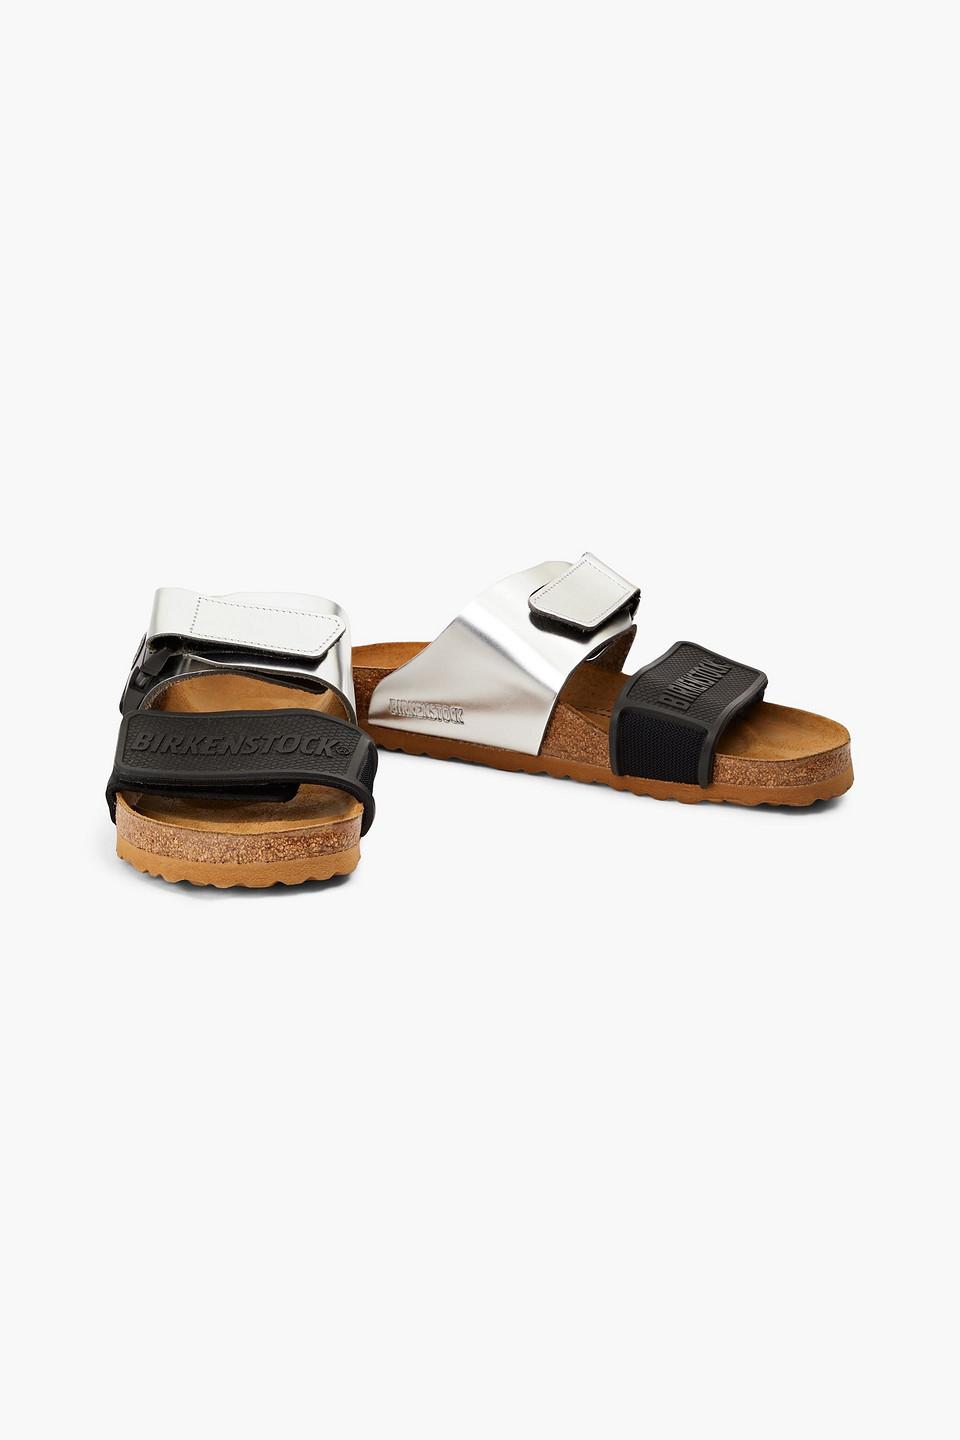 Rick Owens X Birkenstock Rotterdam Rubber And Mirrored-leather Sandals in  Metallic | Lyst